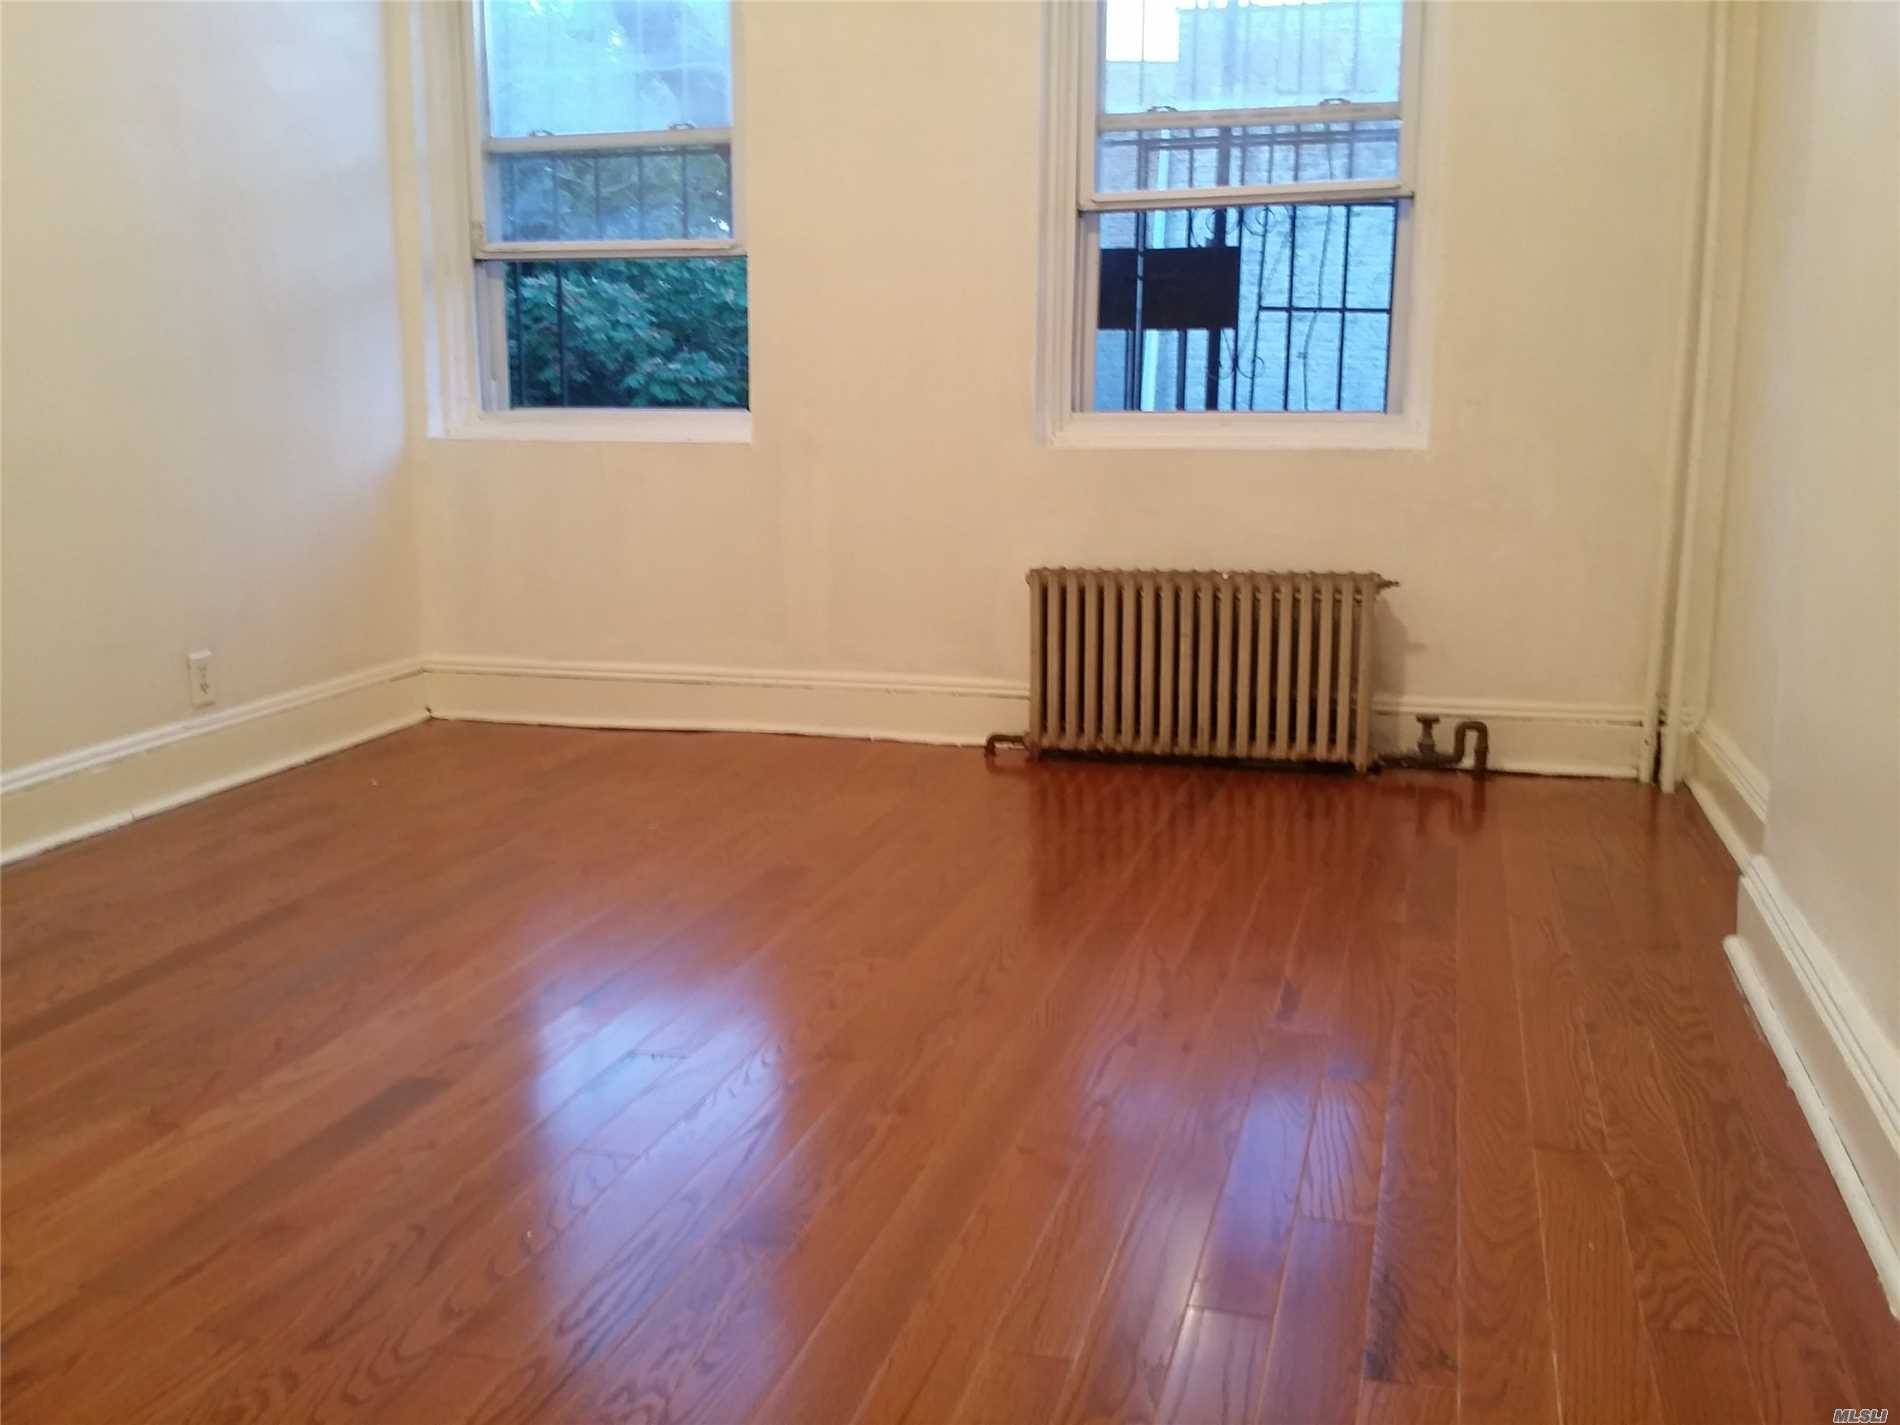 3 BR House Woodhaven Brooklyn